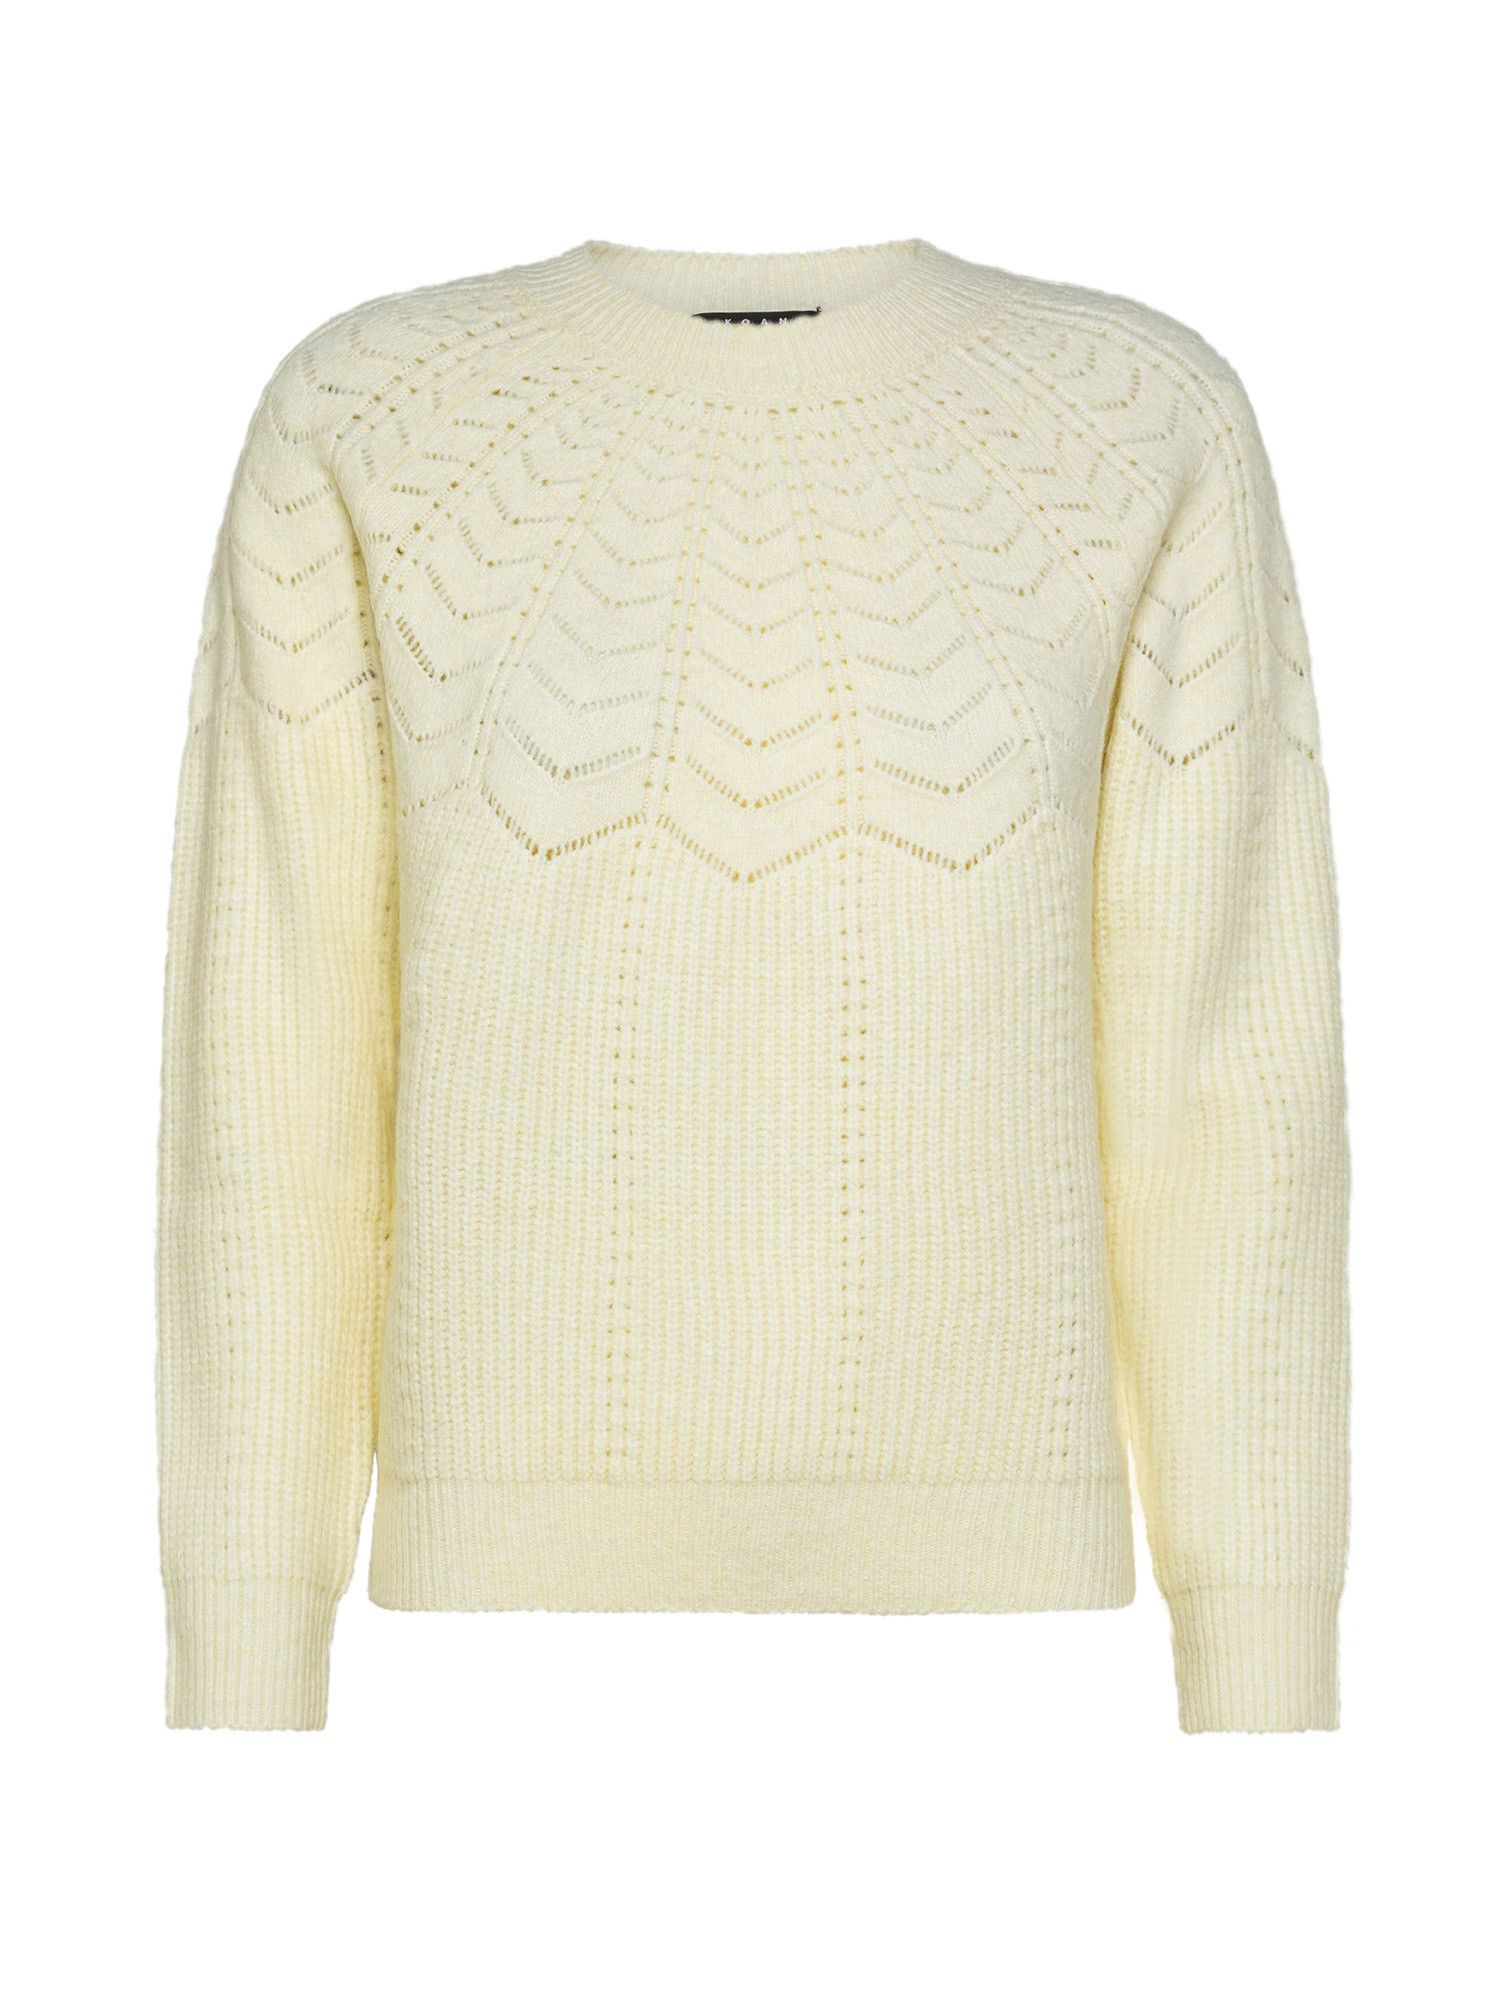 Koan - Ribbed pullover with ajour stitch, White, large image number 0